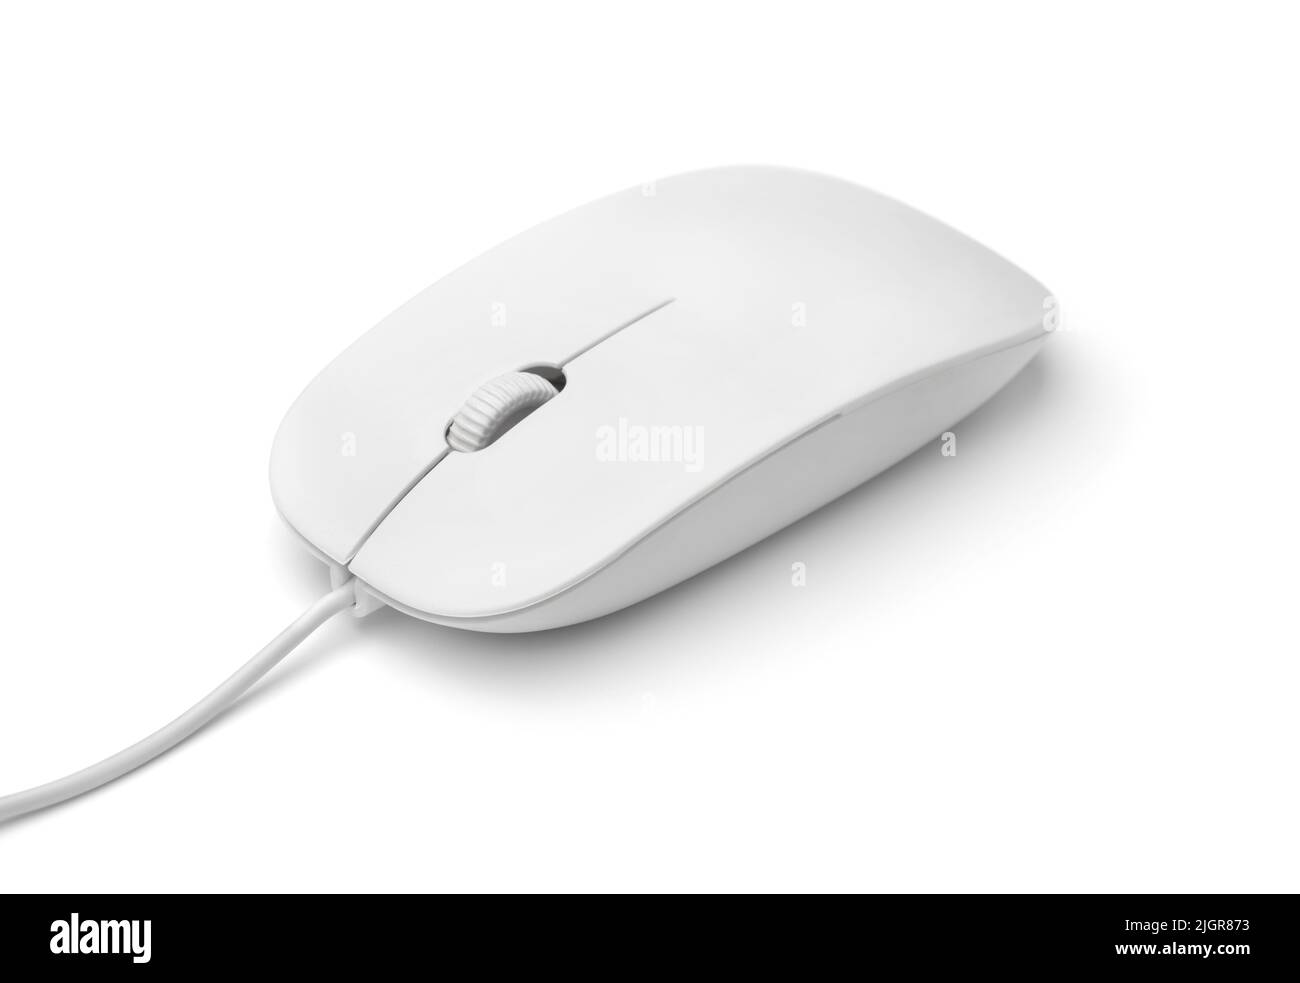 White flat wired computer mouse isolated on white Stock Photo